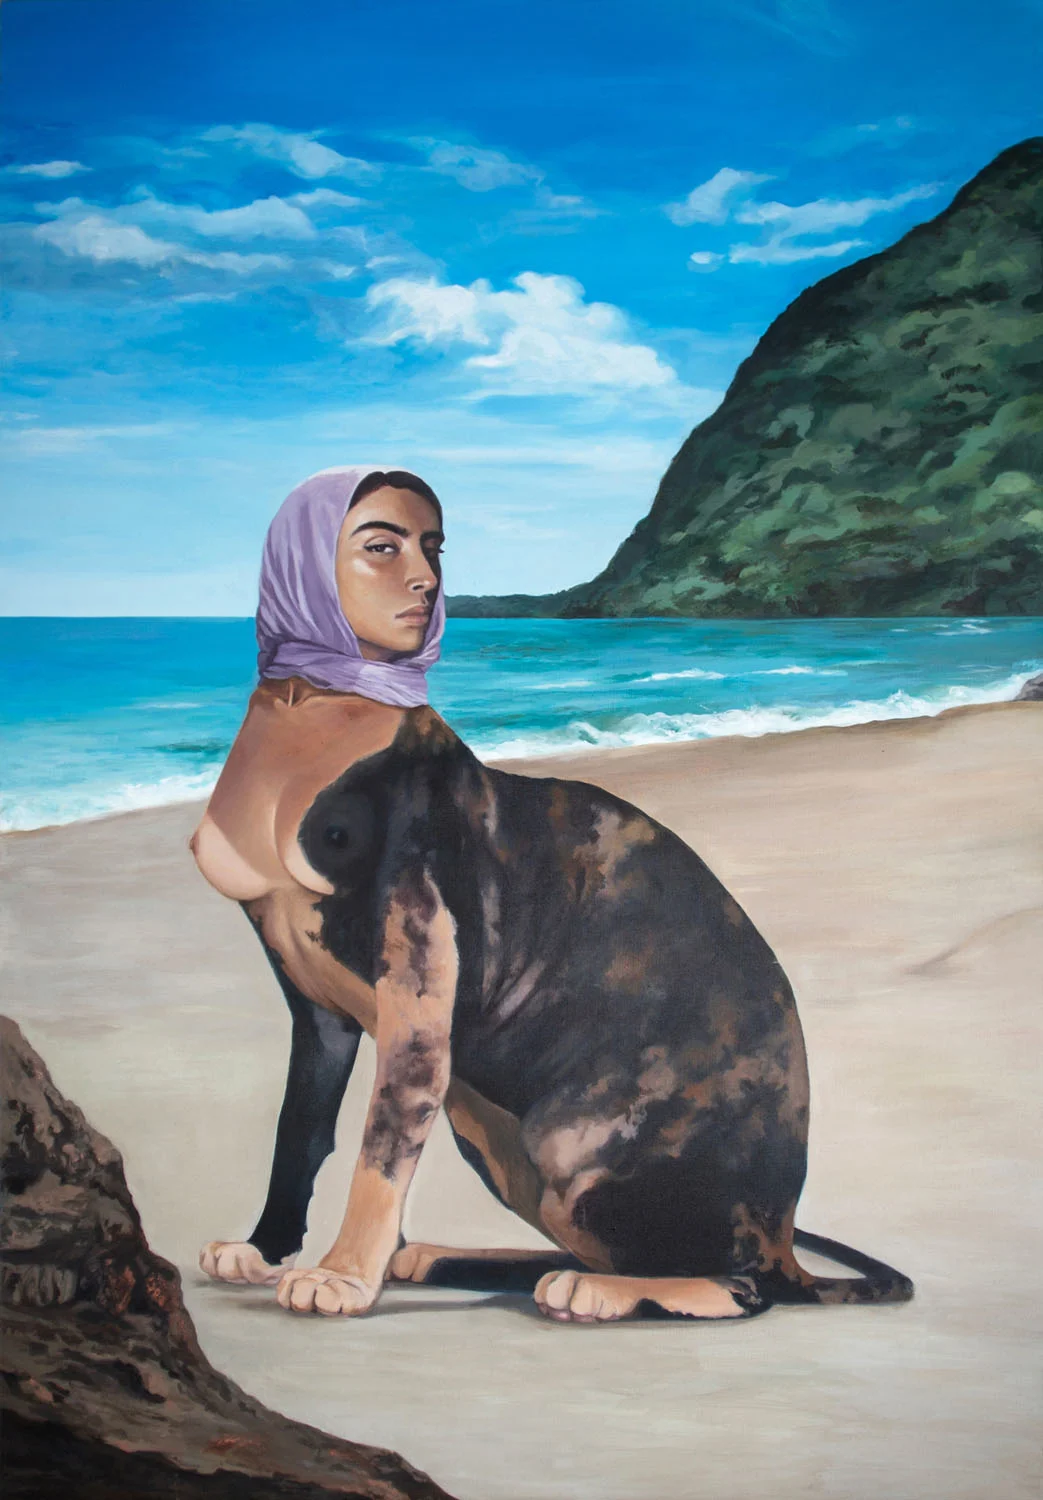 An acrylic painting depicting a chimera with the body of a calico sphynx cat and the head and breasts of a woman wearing a headscarf in front of a beach landscape.
